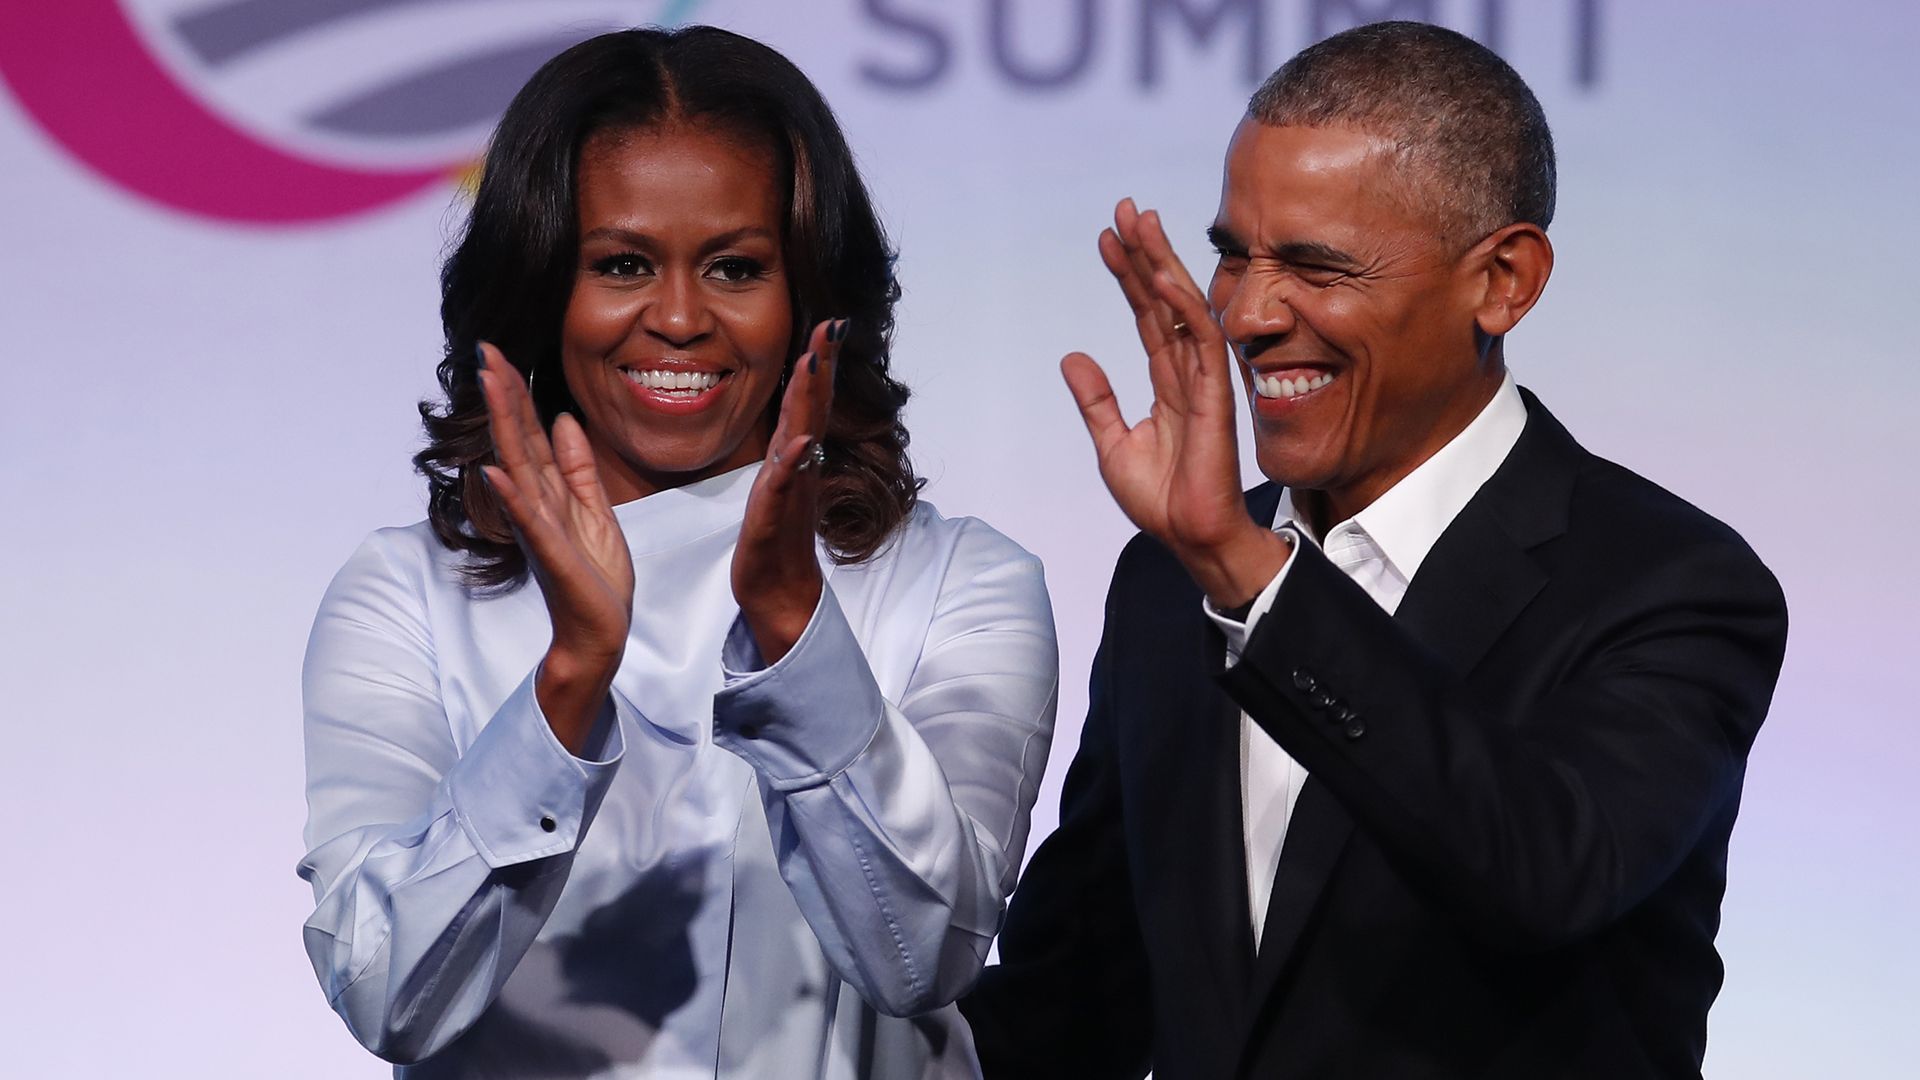 Barack and Michelle Obama smiling, with Michelle clapping and Barack waving.